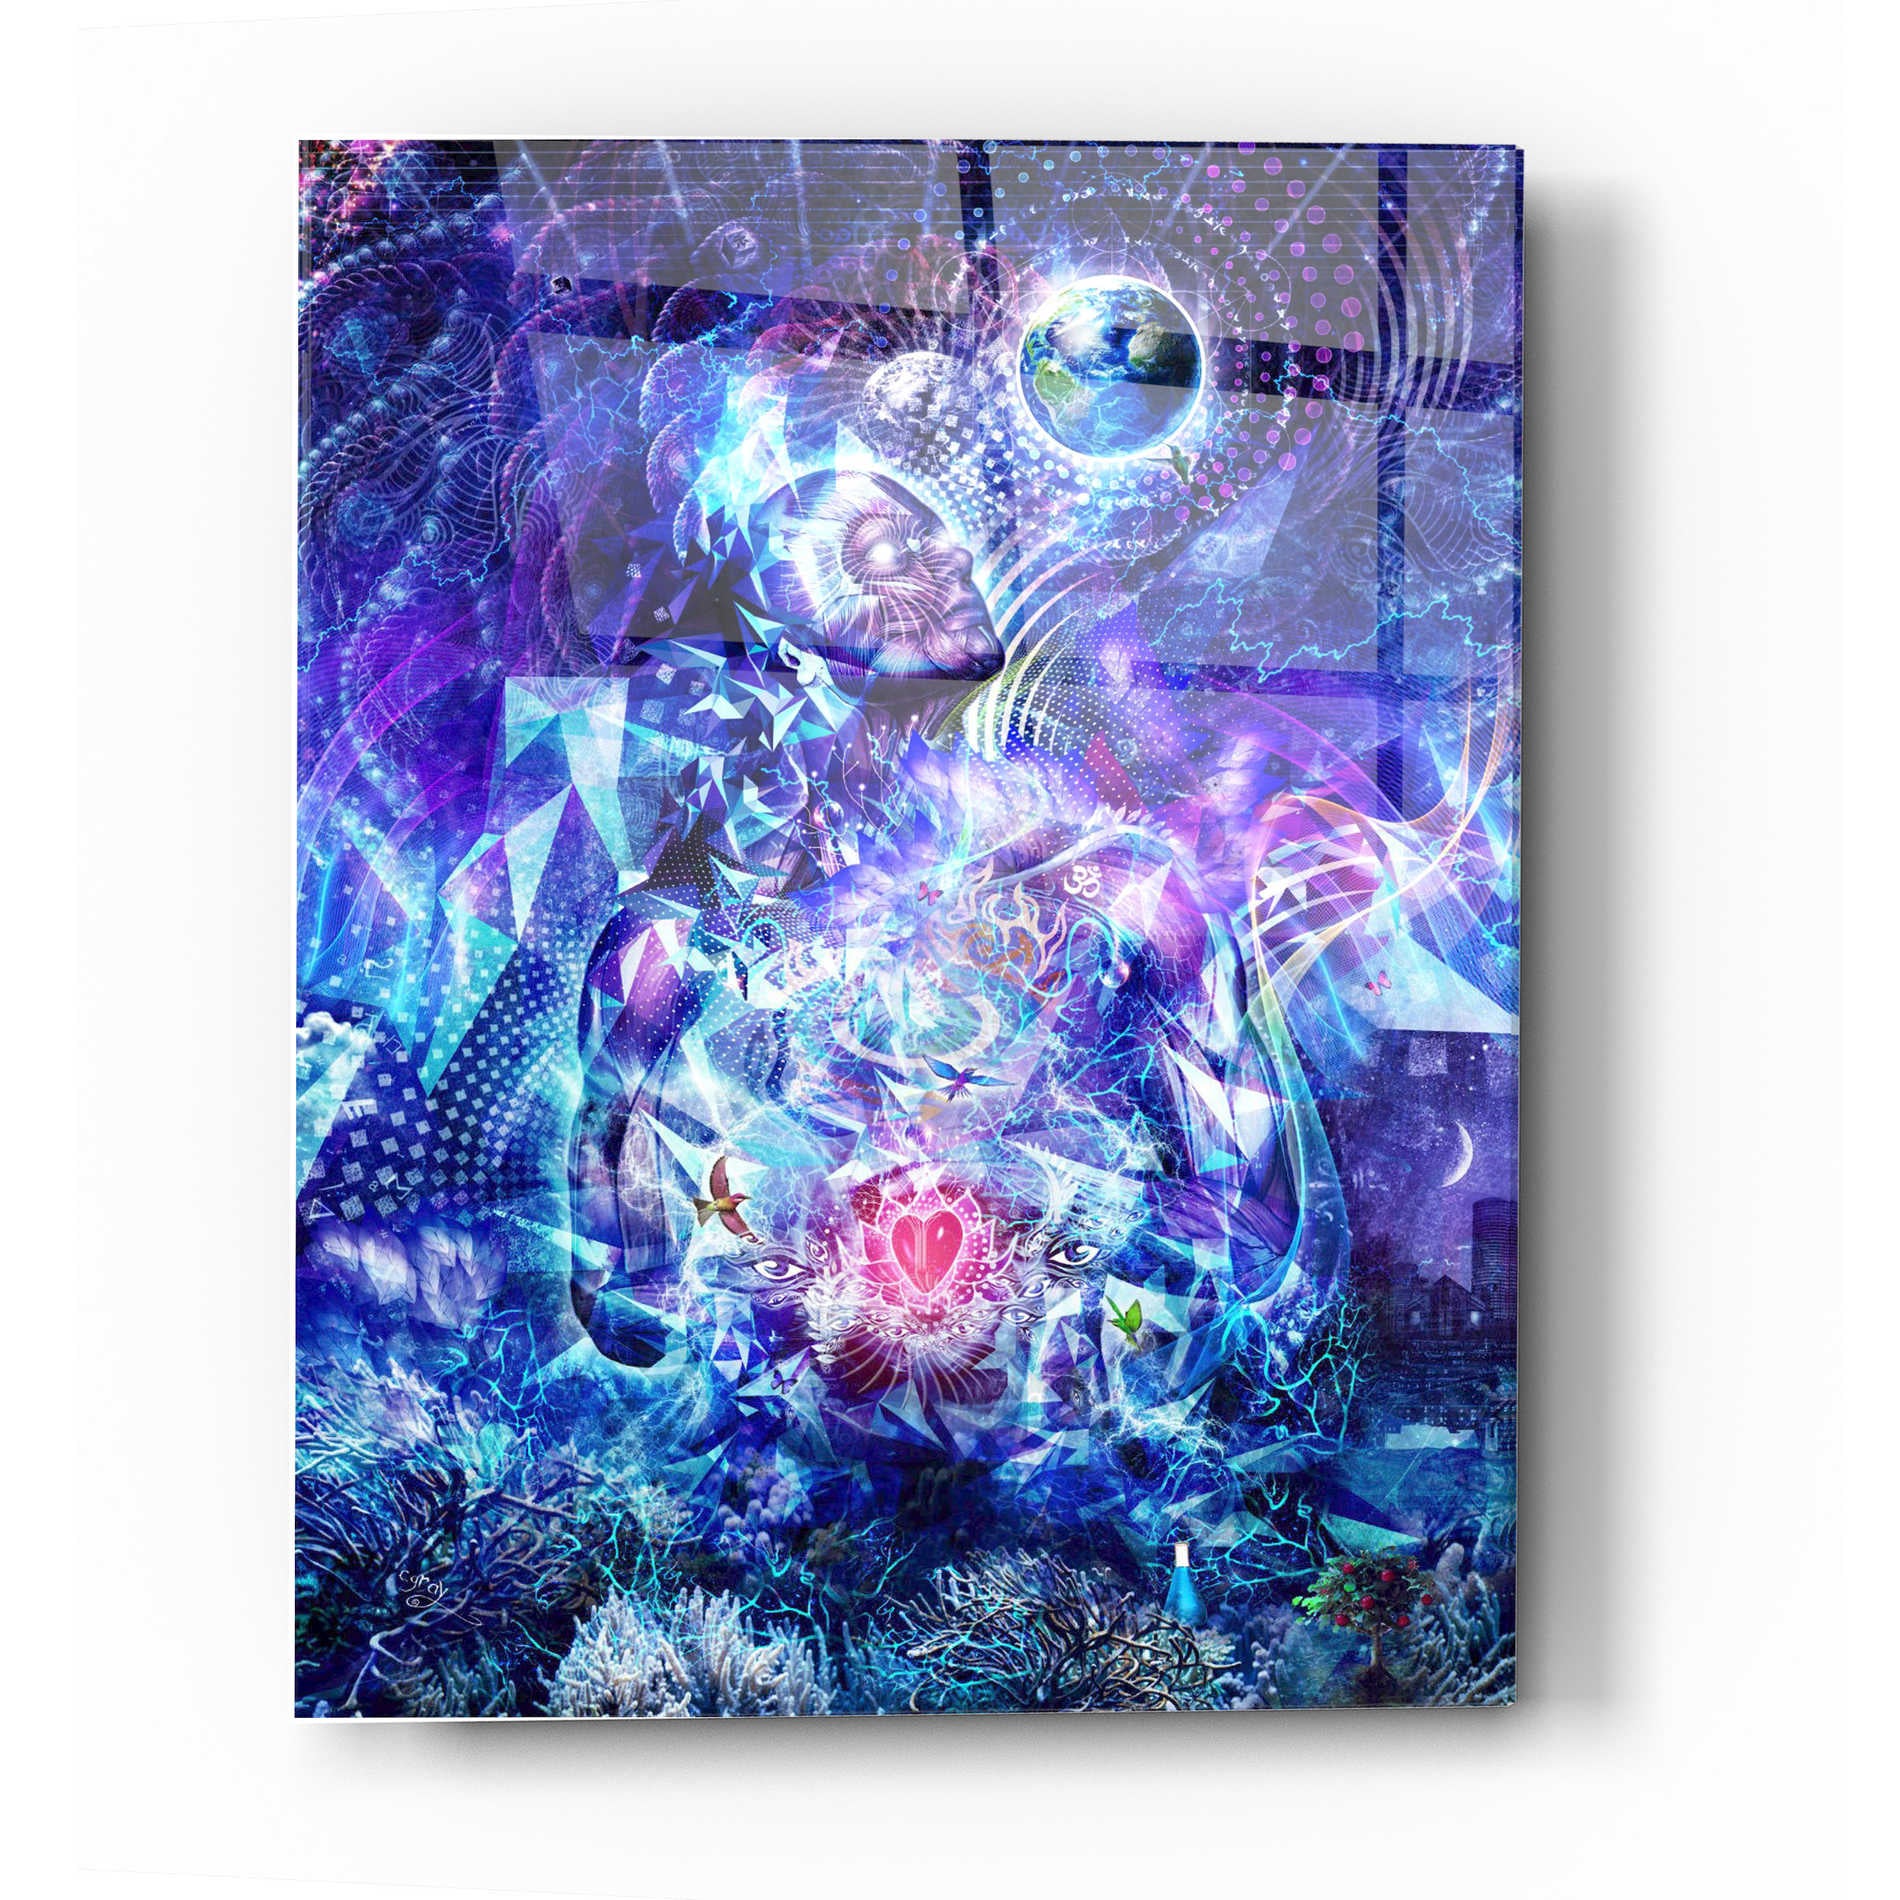 Epic Art 'Transcension Vertical' by Cameron Gray, Acrylic Glass Wall Art,24x36